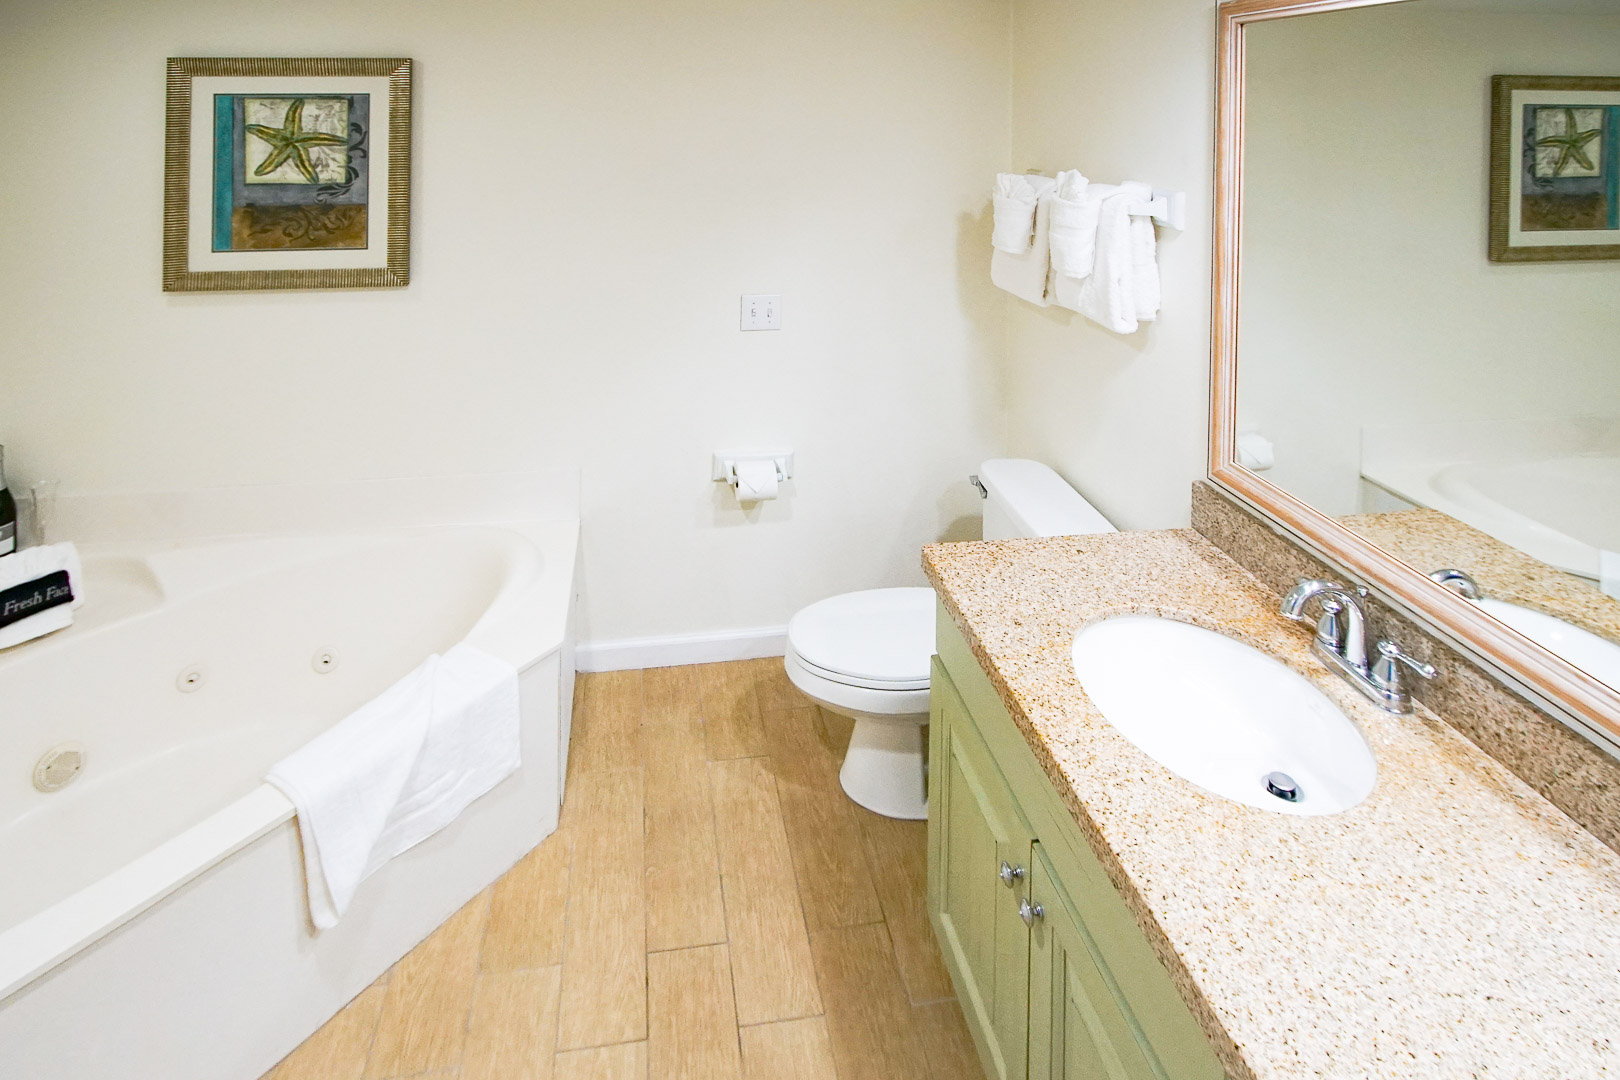 An airy bathroom with jacuzzi tub at VRI's The Resort on Cocoa Beach in Florida.